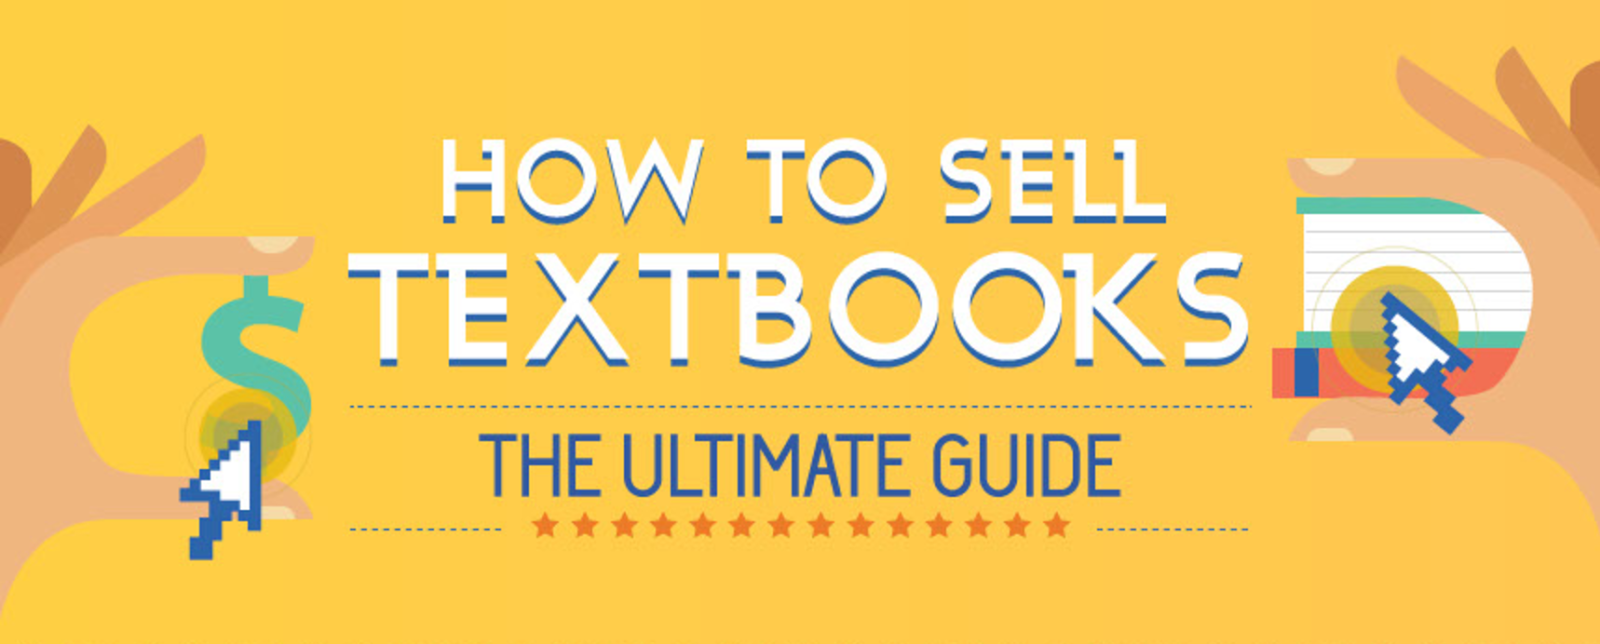 Ultimade Guide on How to Sell Your Used Textbooks Online